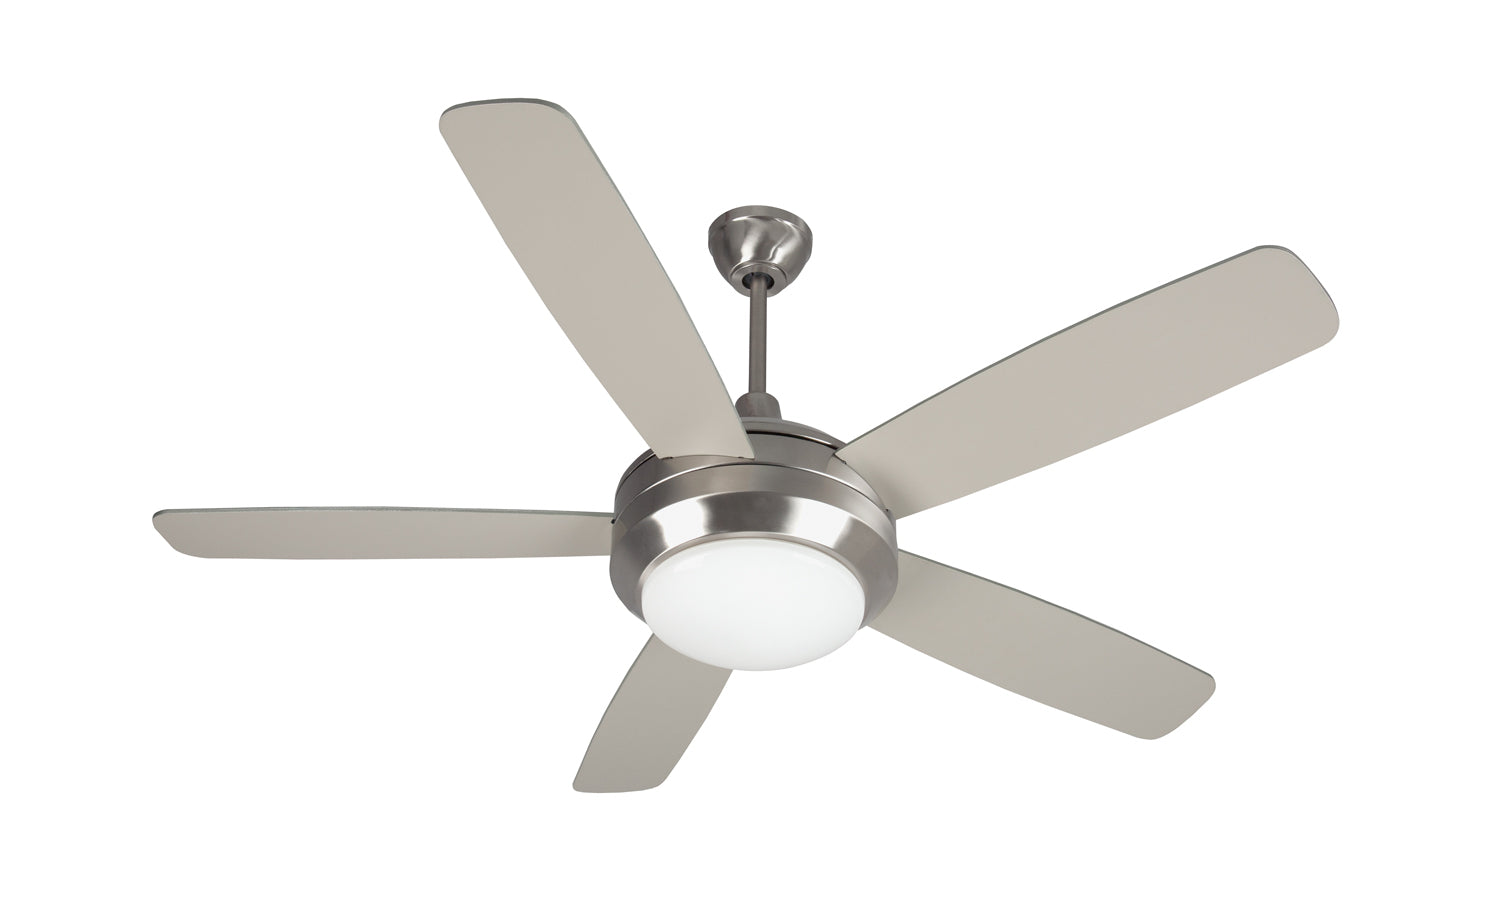 Craftmade Helios HE52BNK5-LED Ceiling Fan 52 Inch - Brushed Polished Nickel